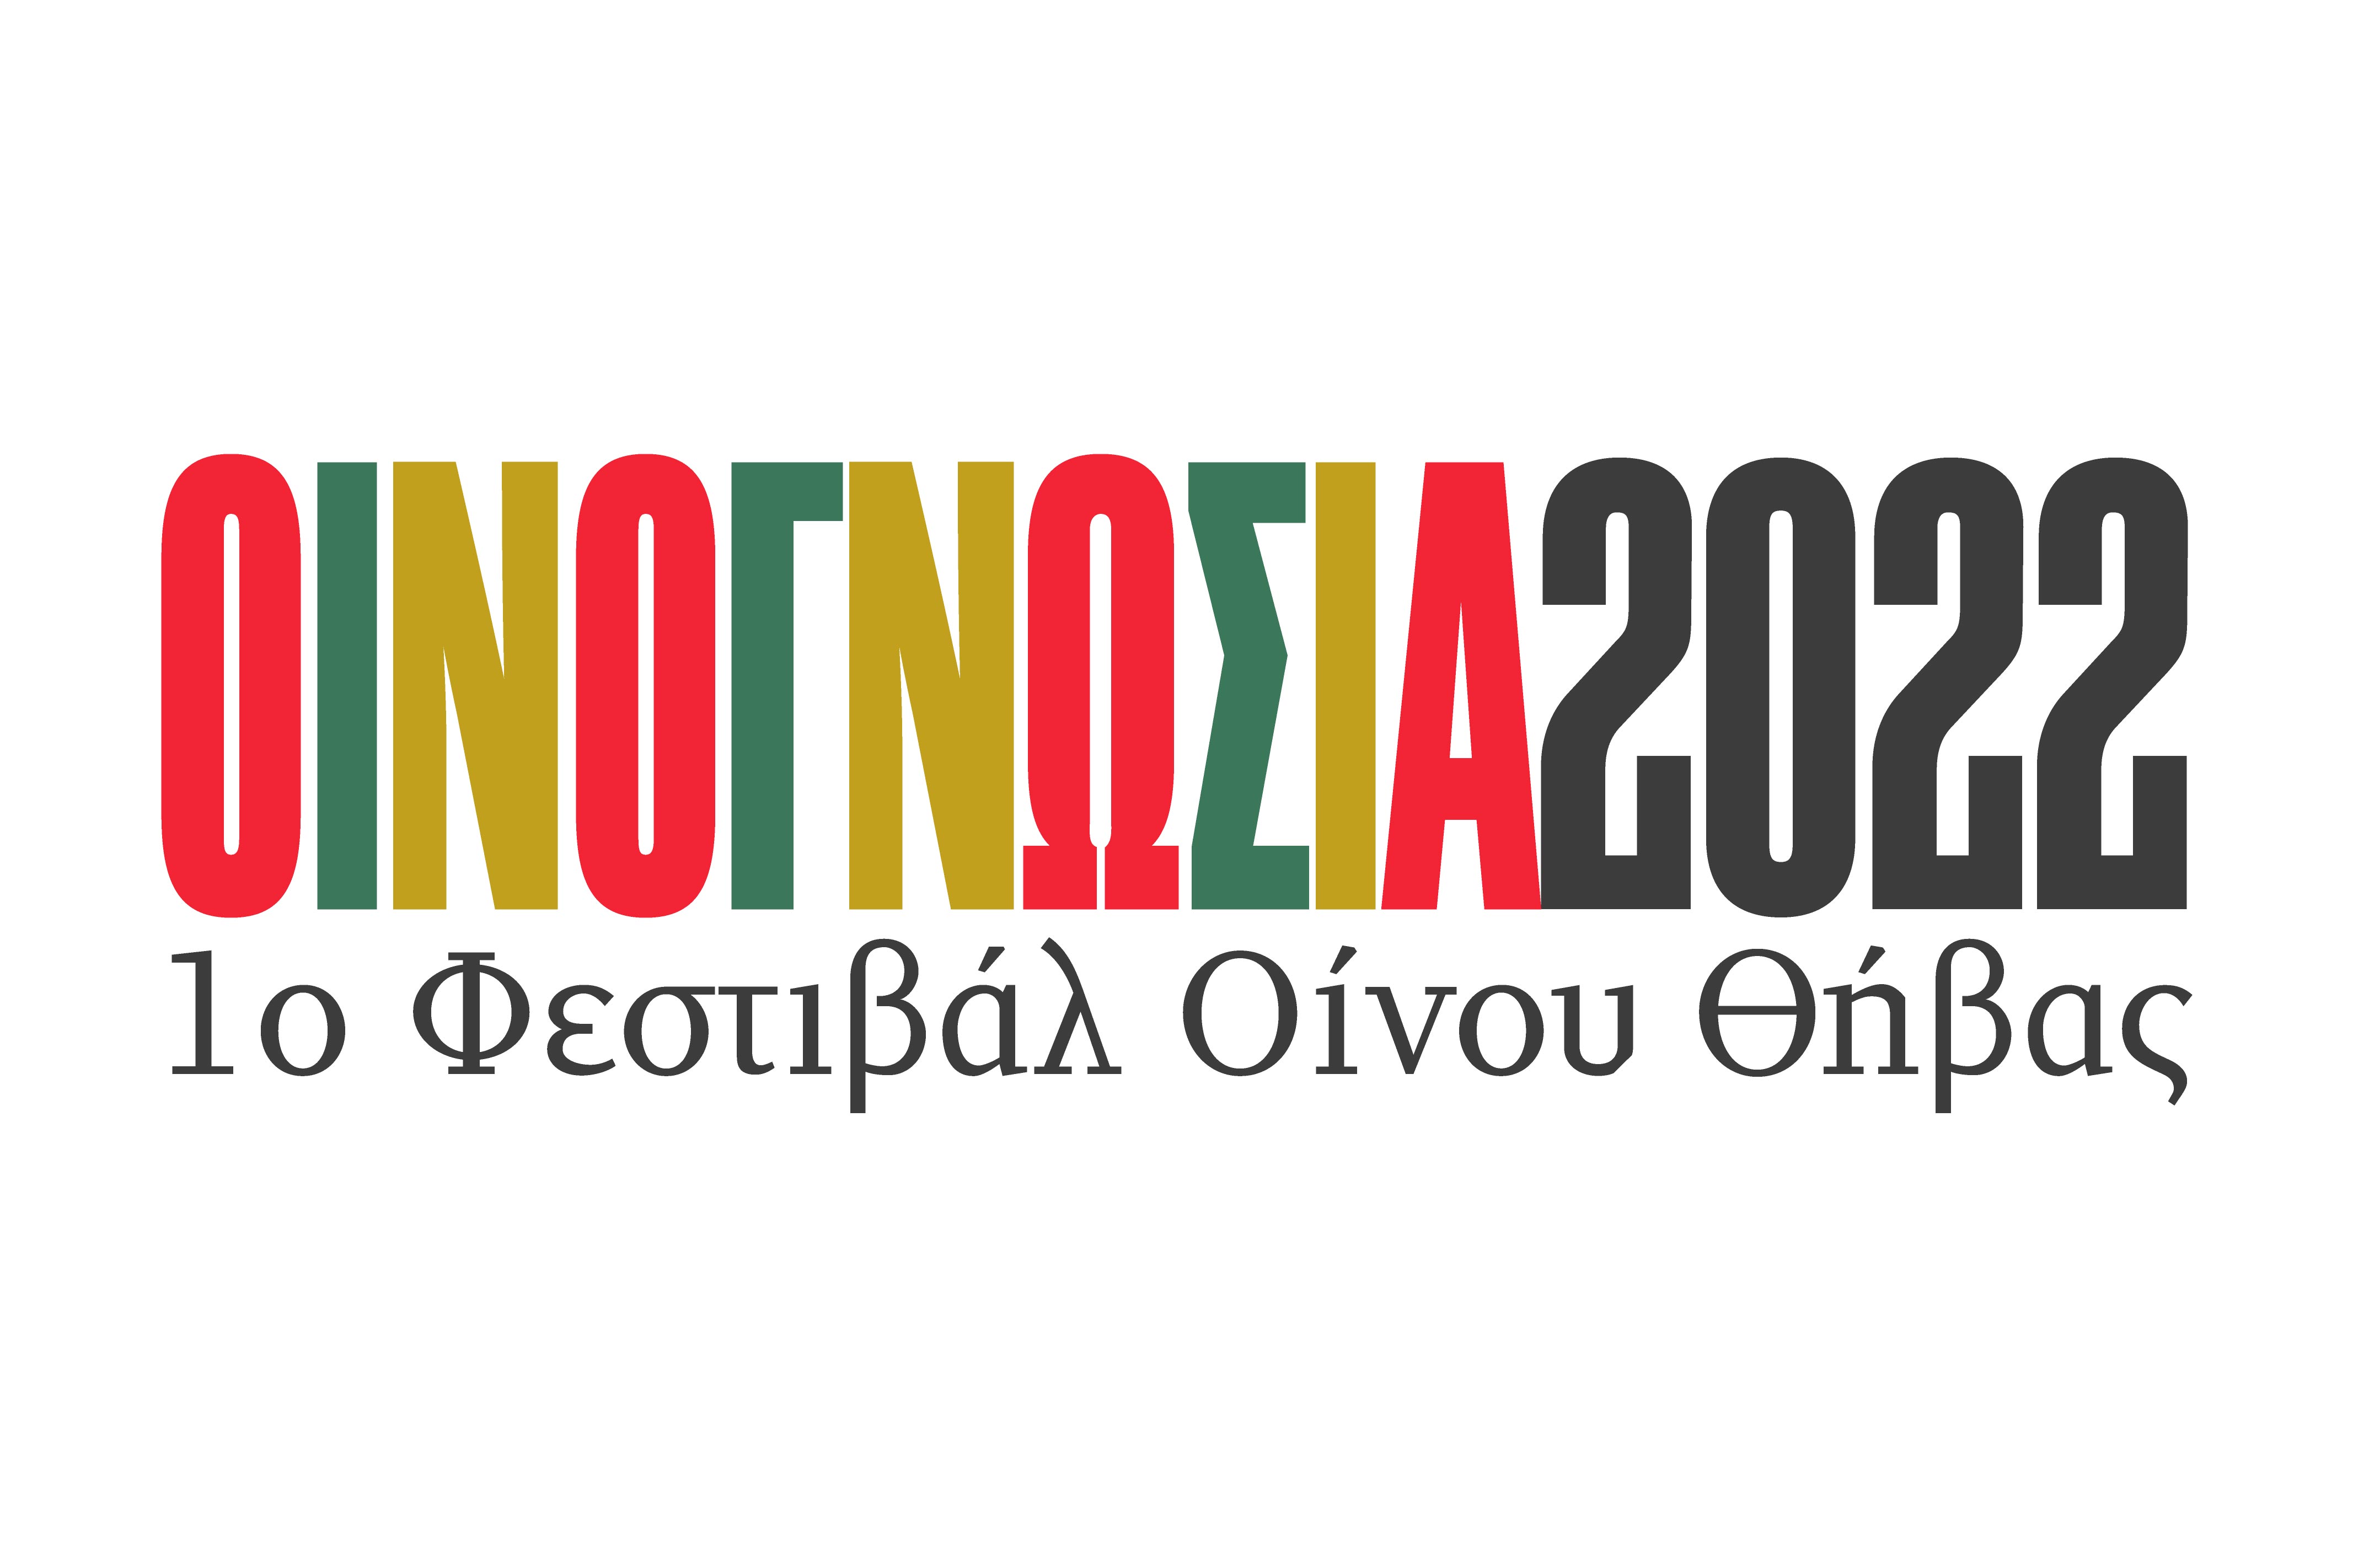 festival logotype in red green gold and black